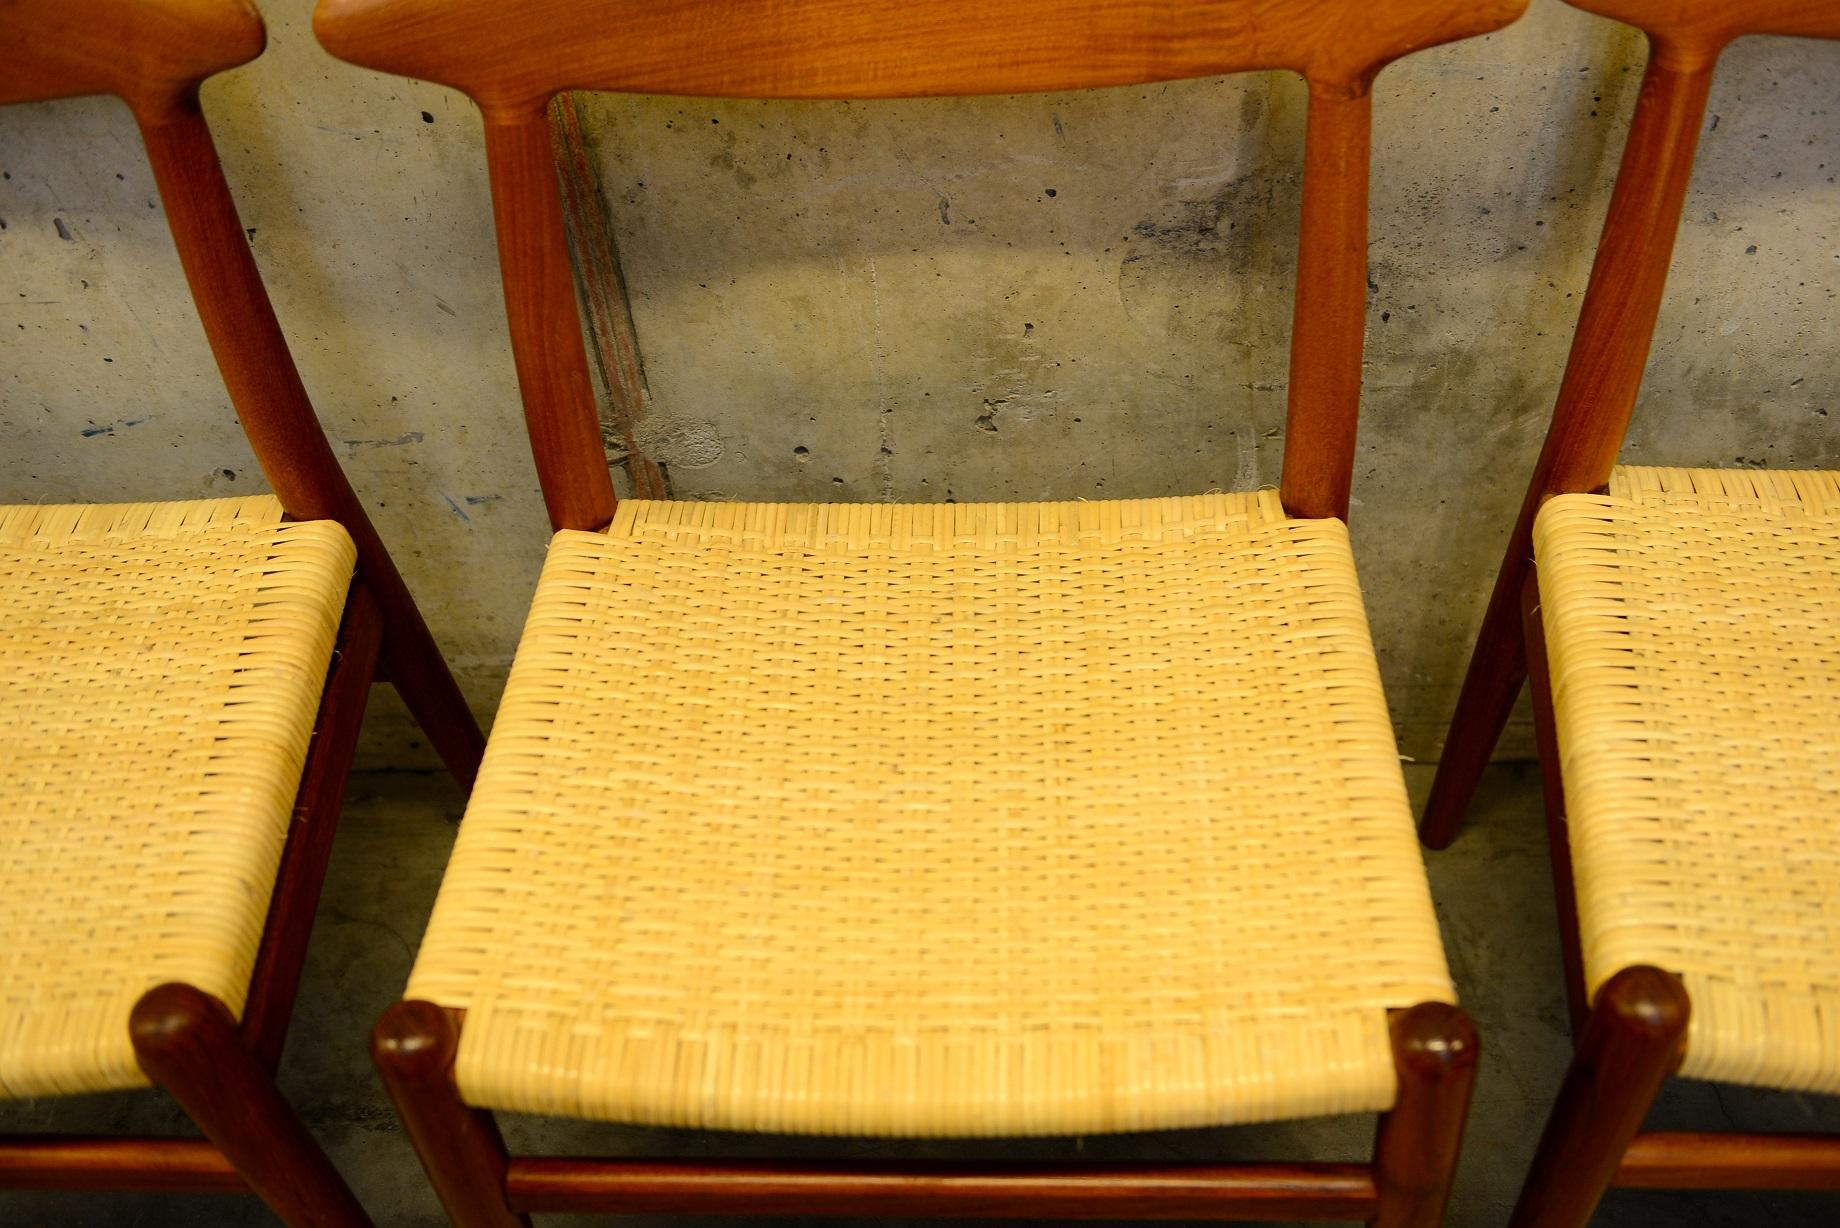 Set of 4 W2 Teak and Cane Chairs by Hans J. Wegner, 1950s, C.M. Madsens DK In Good Condition For Sale In Limhamn, SE